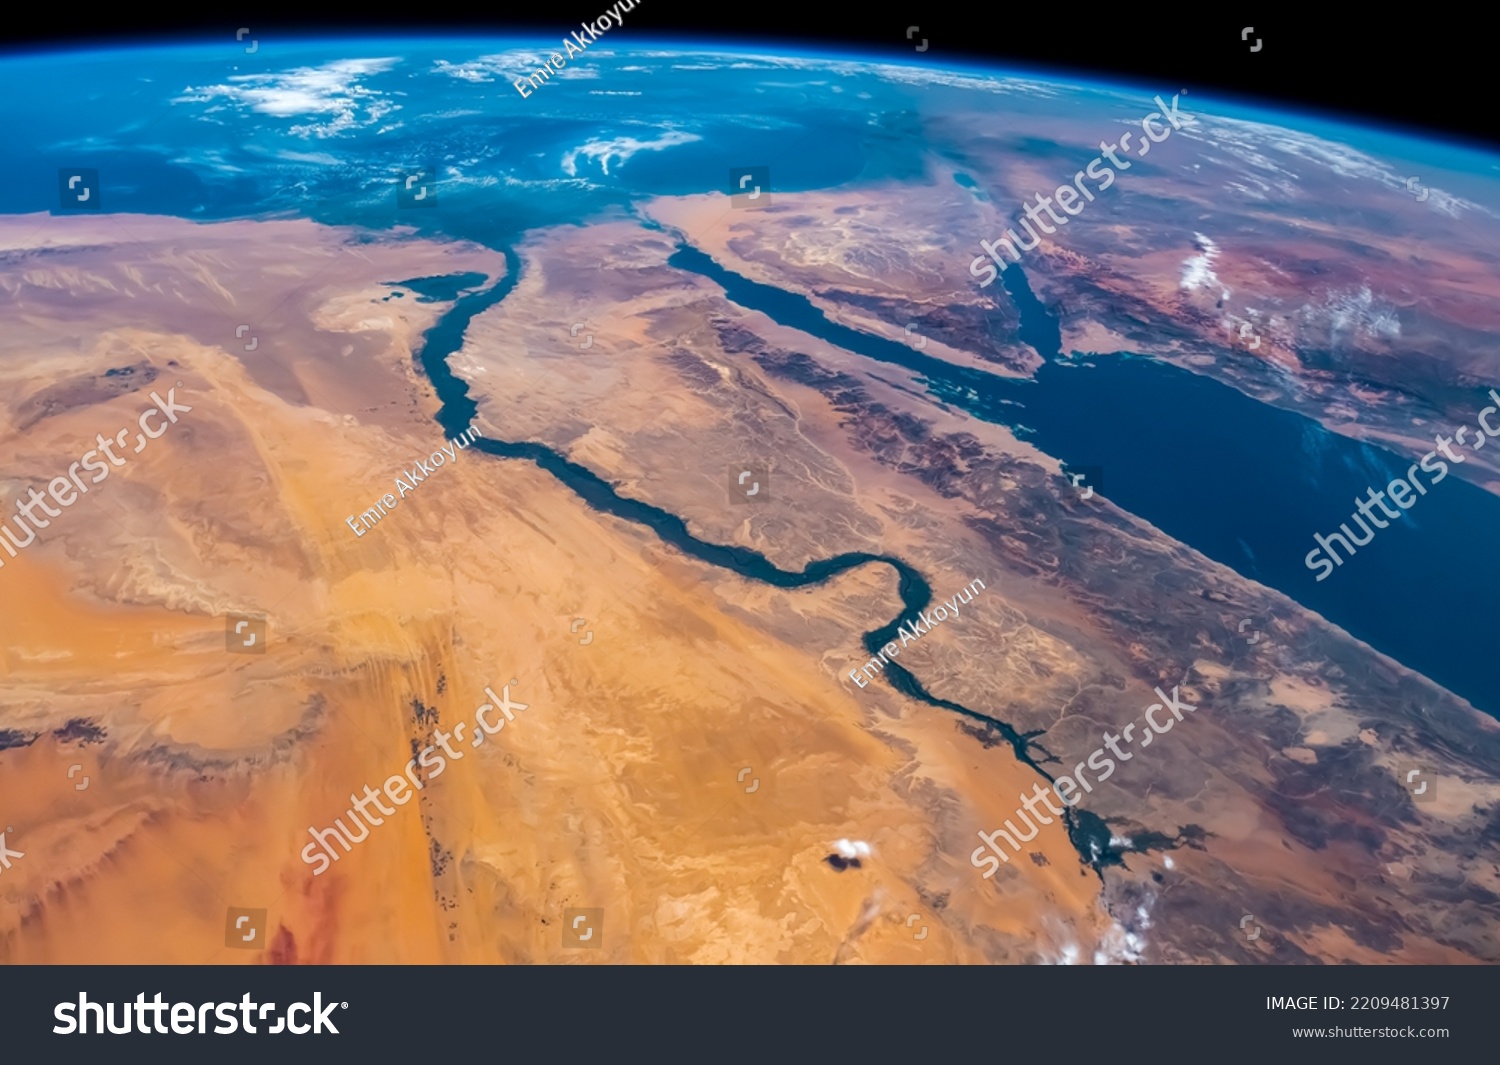 Aerial view of Nile River, Red Sea and Mediterranean Sea. Egypt, Saudi Arabia, Israel and Jordan as seen from space. Satellite view. Elements of this image furnished by NASA. #2209481397